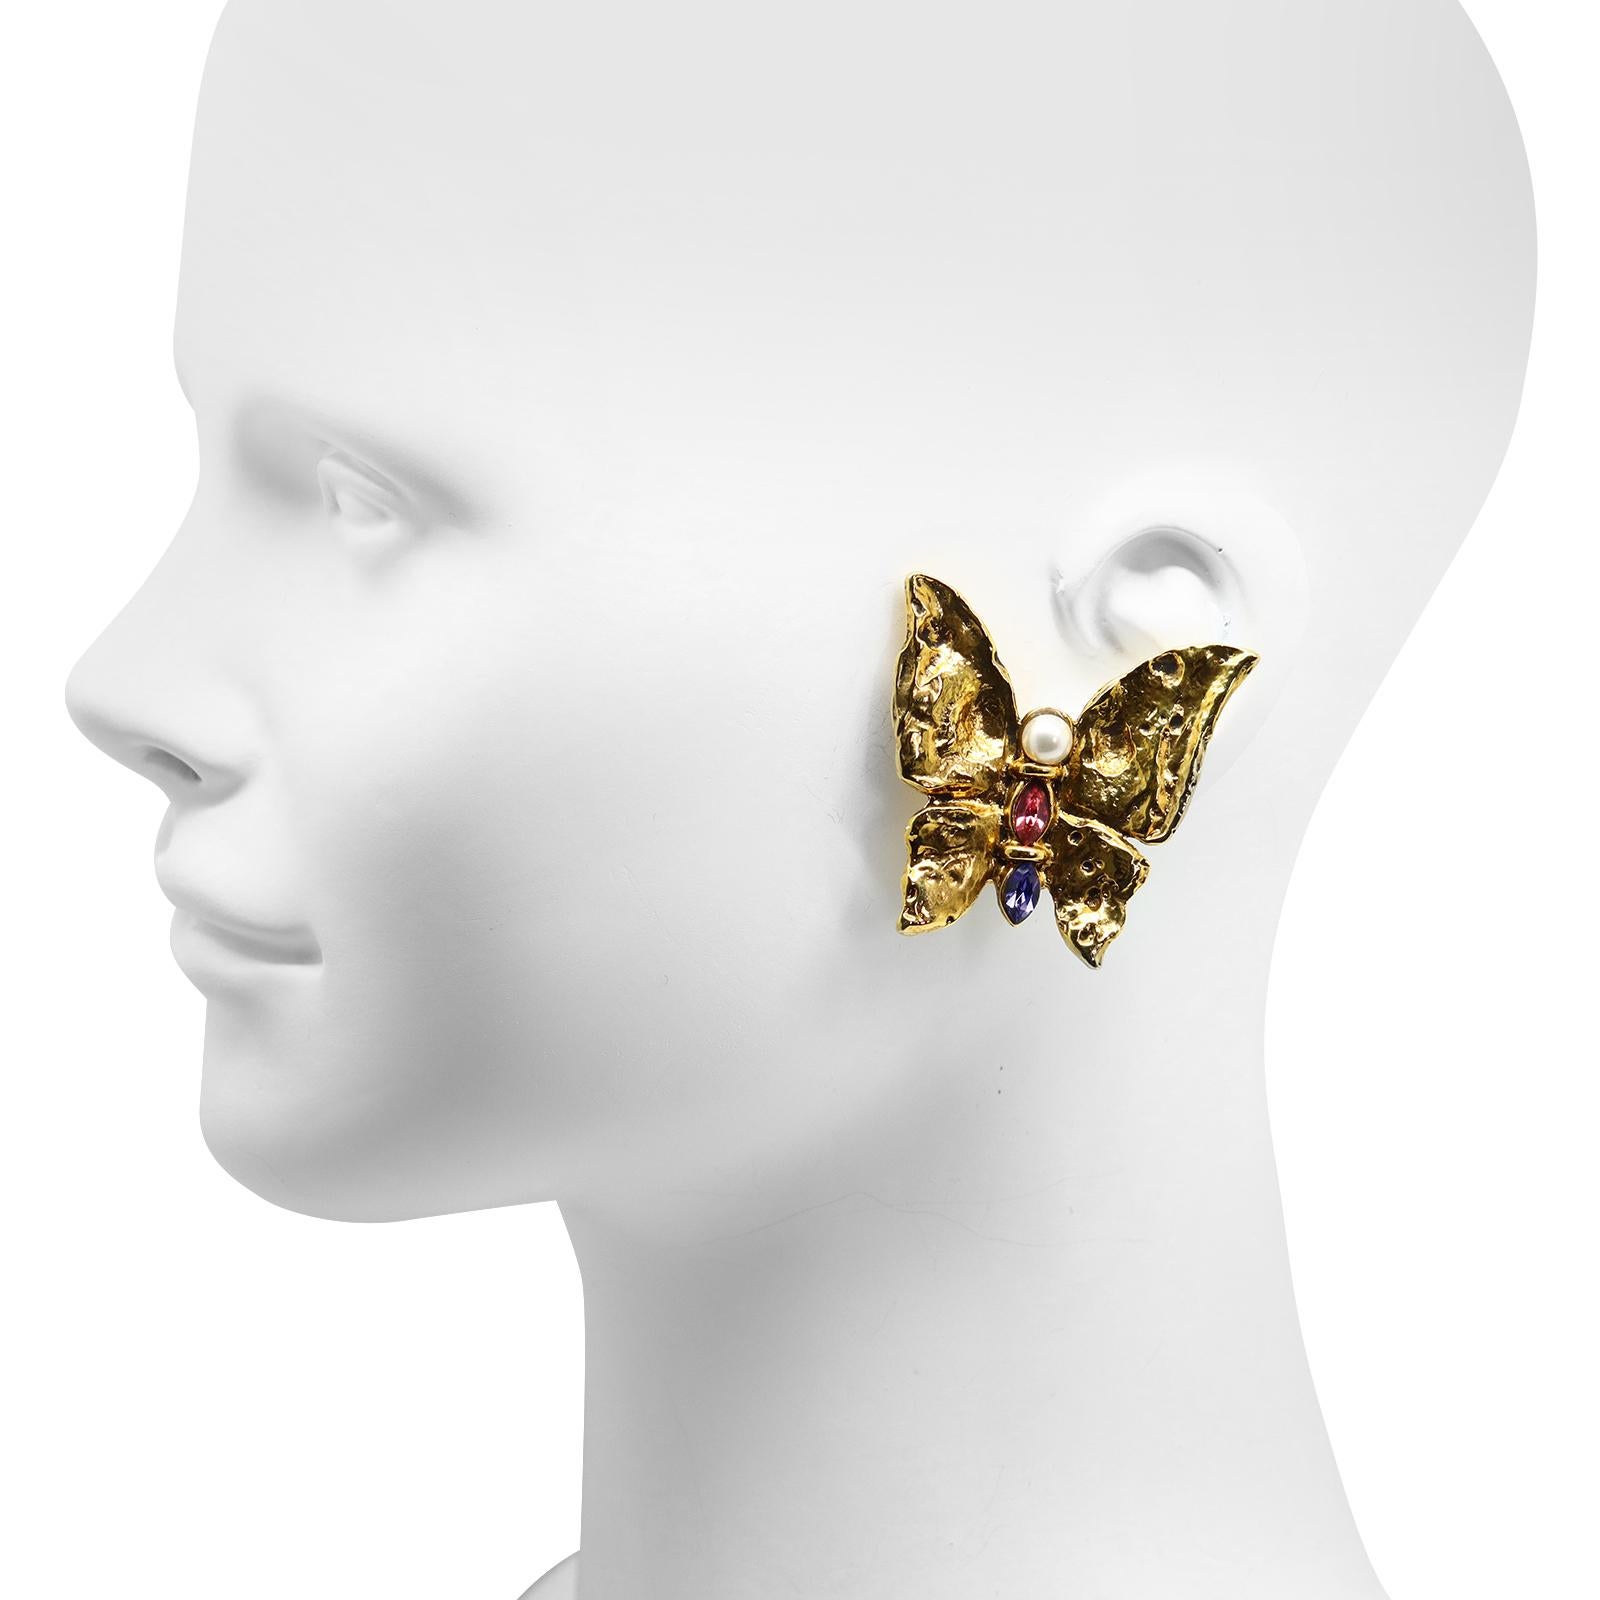 Vintage Yves Saint Laurent  Rive Gauche YSL Earrings. Butterfly Earrings with Pink and Blue Crystal and Faux Pearl on Hammered and Swirled Metal.  Clip On  

Just look at the photos and the video. Absolutely French and Absolutely Gorgeous. Look at